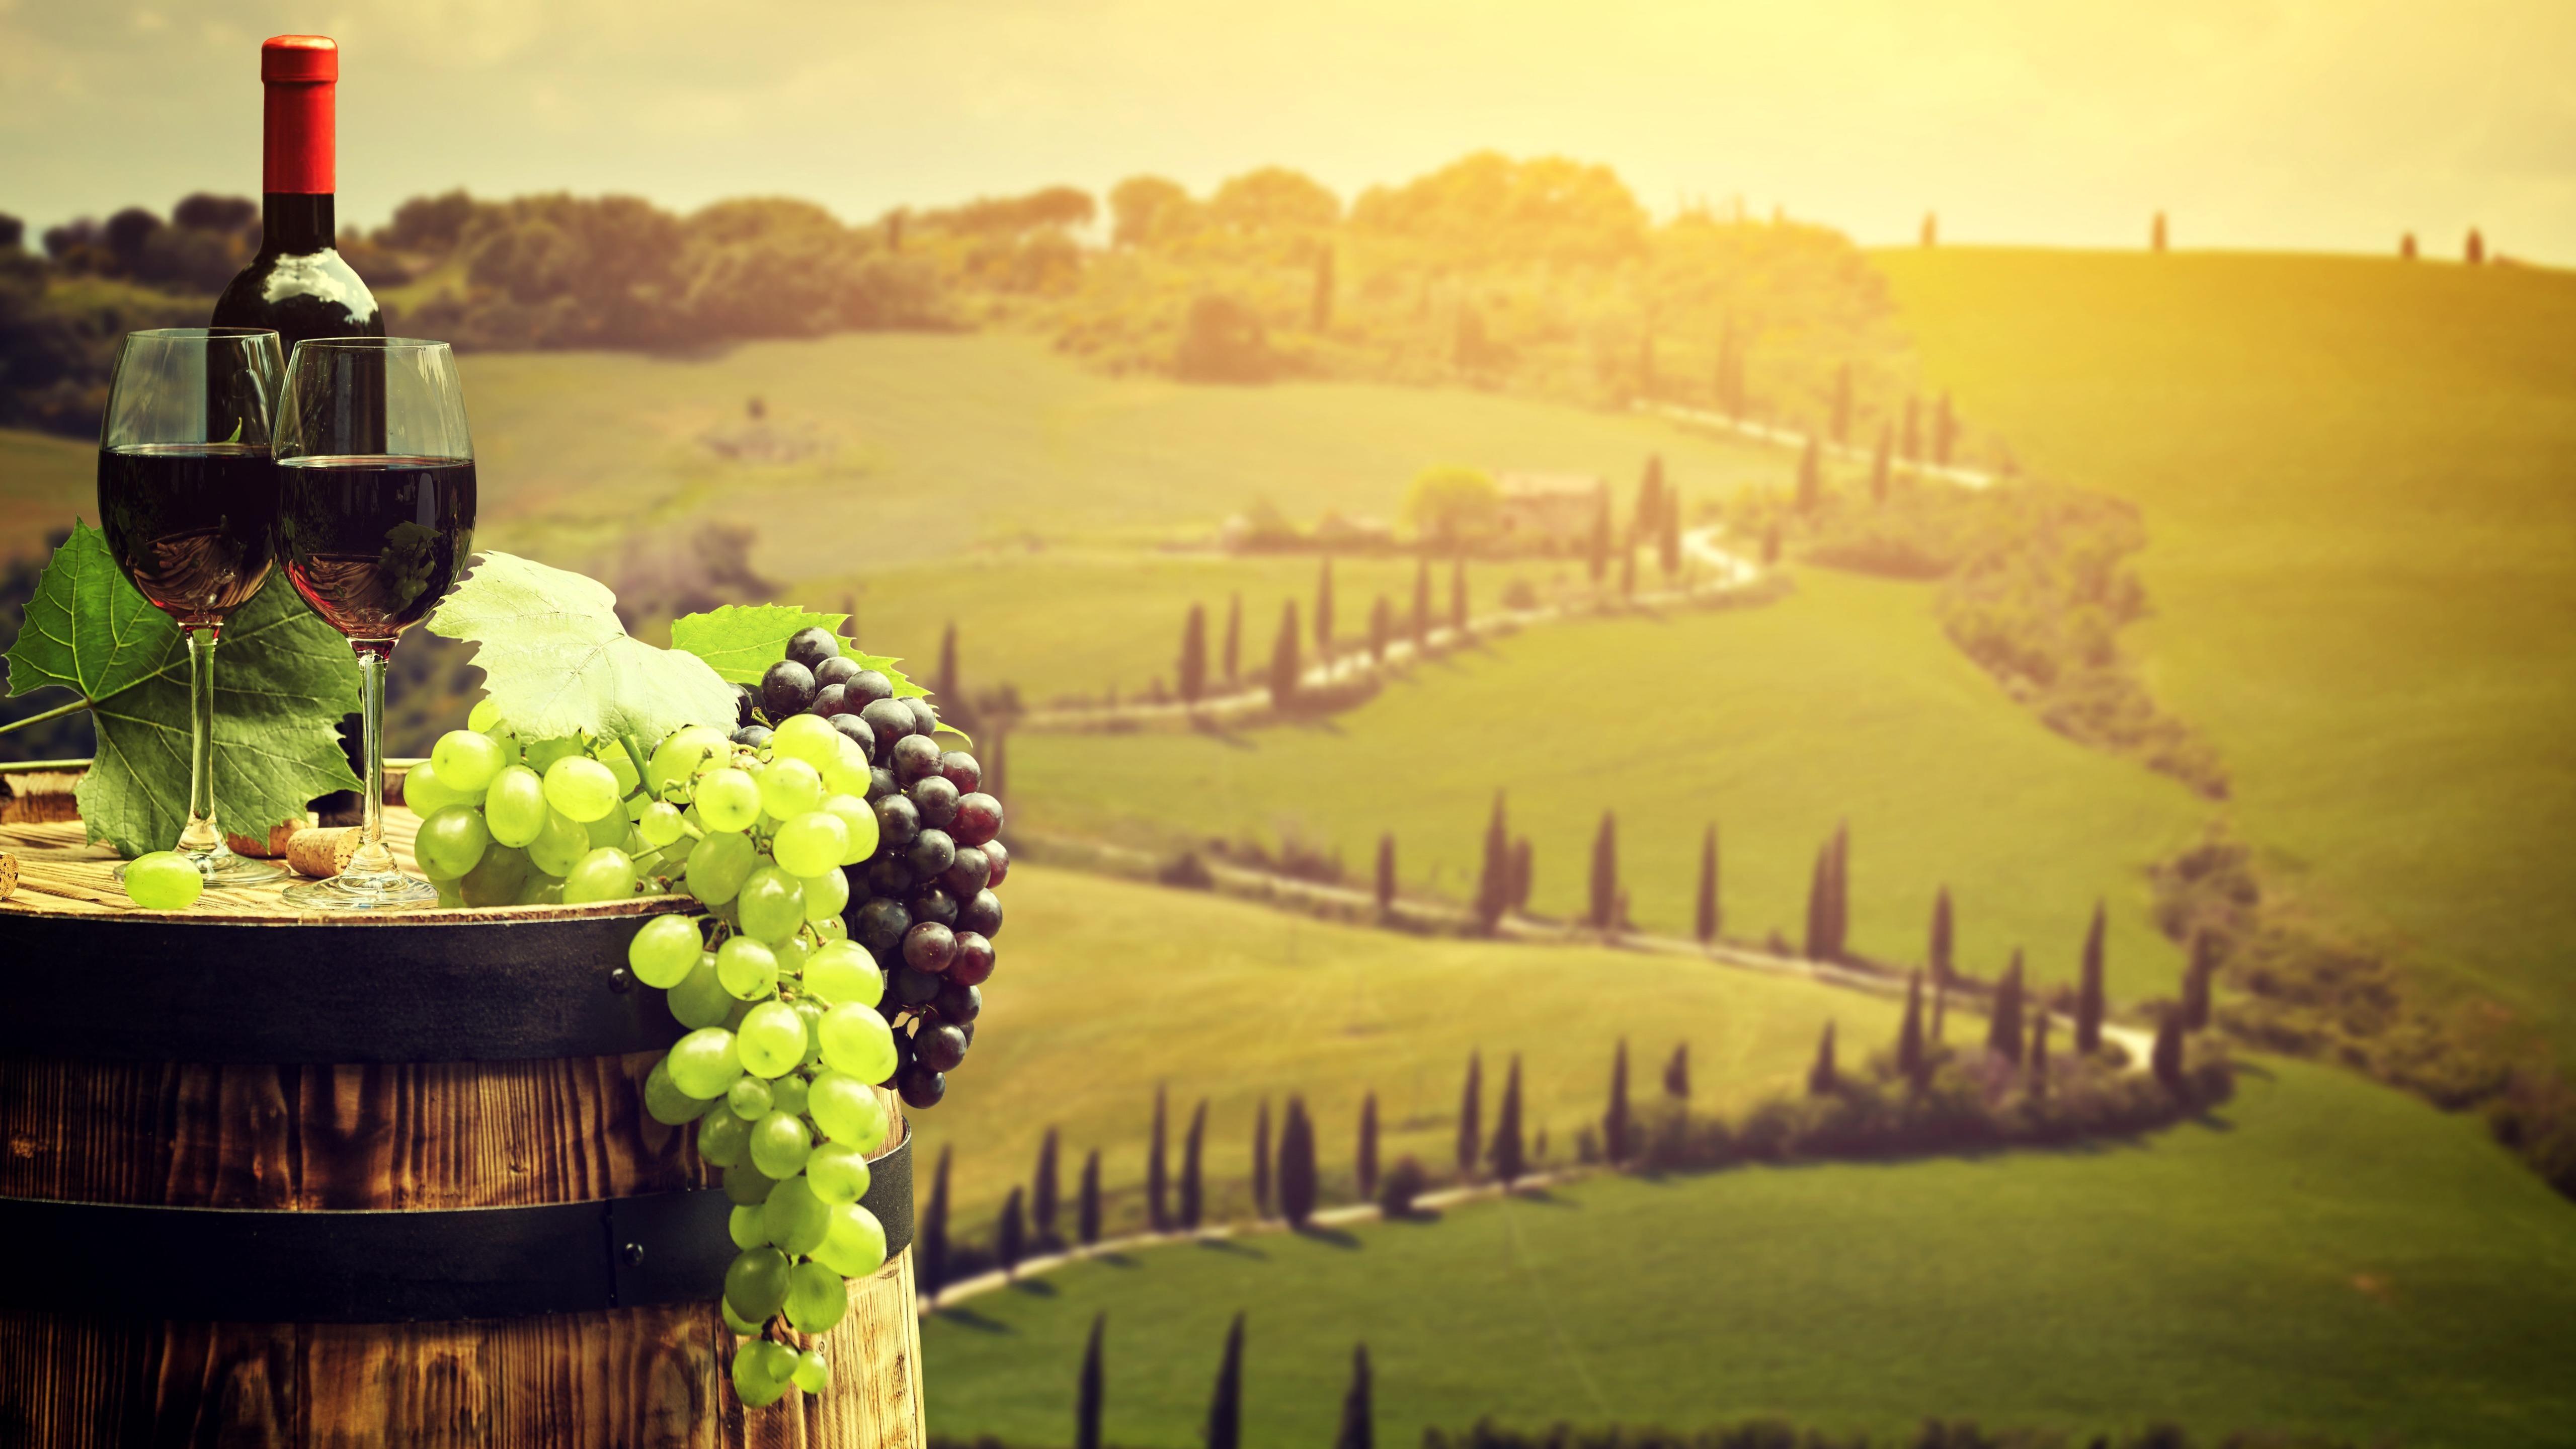 Grapes And Wine Wallpaper. Wallpaper Studio 10. Tens of thousands